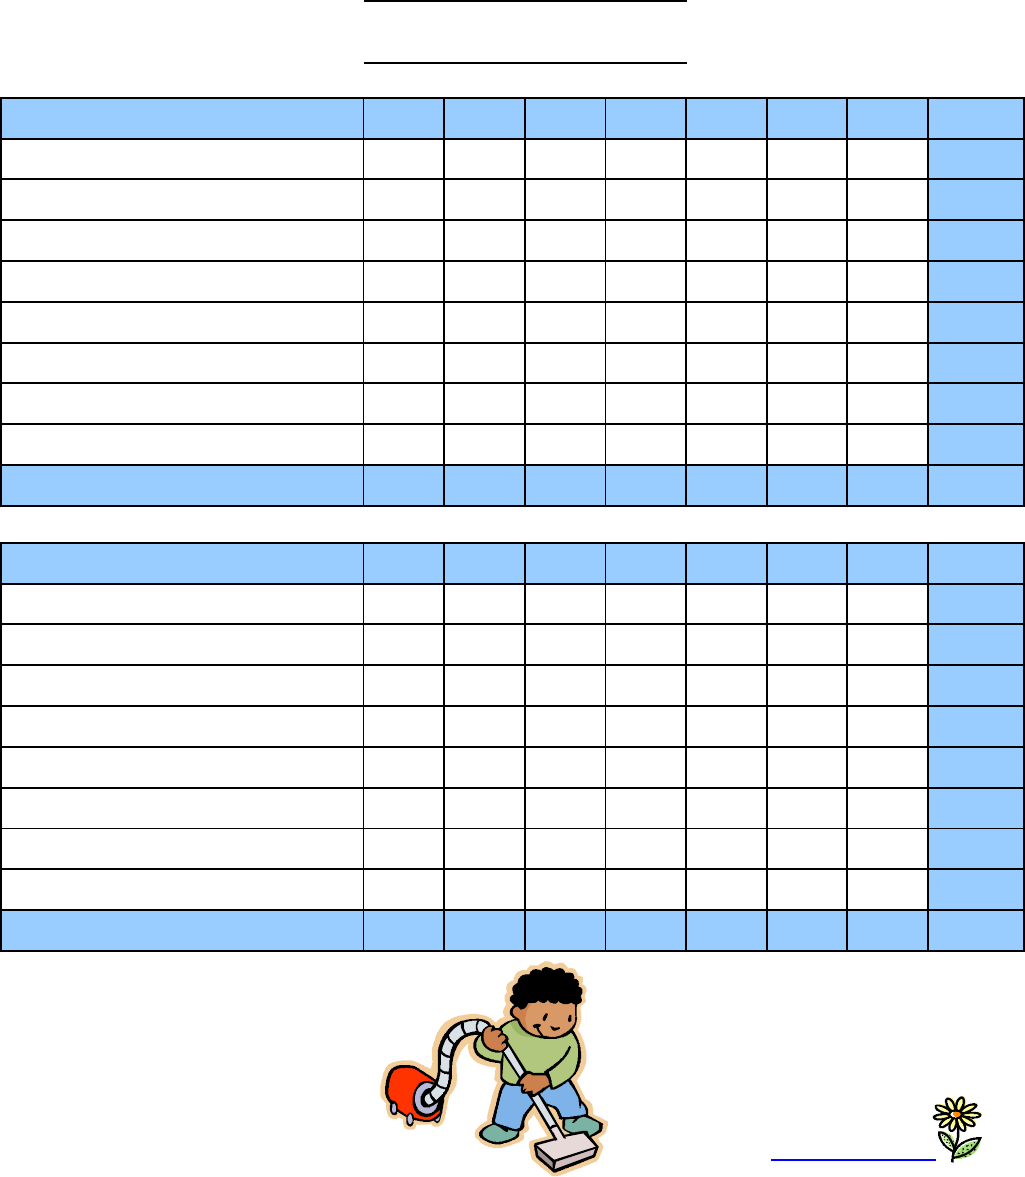 Responsibility Chart for Boy